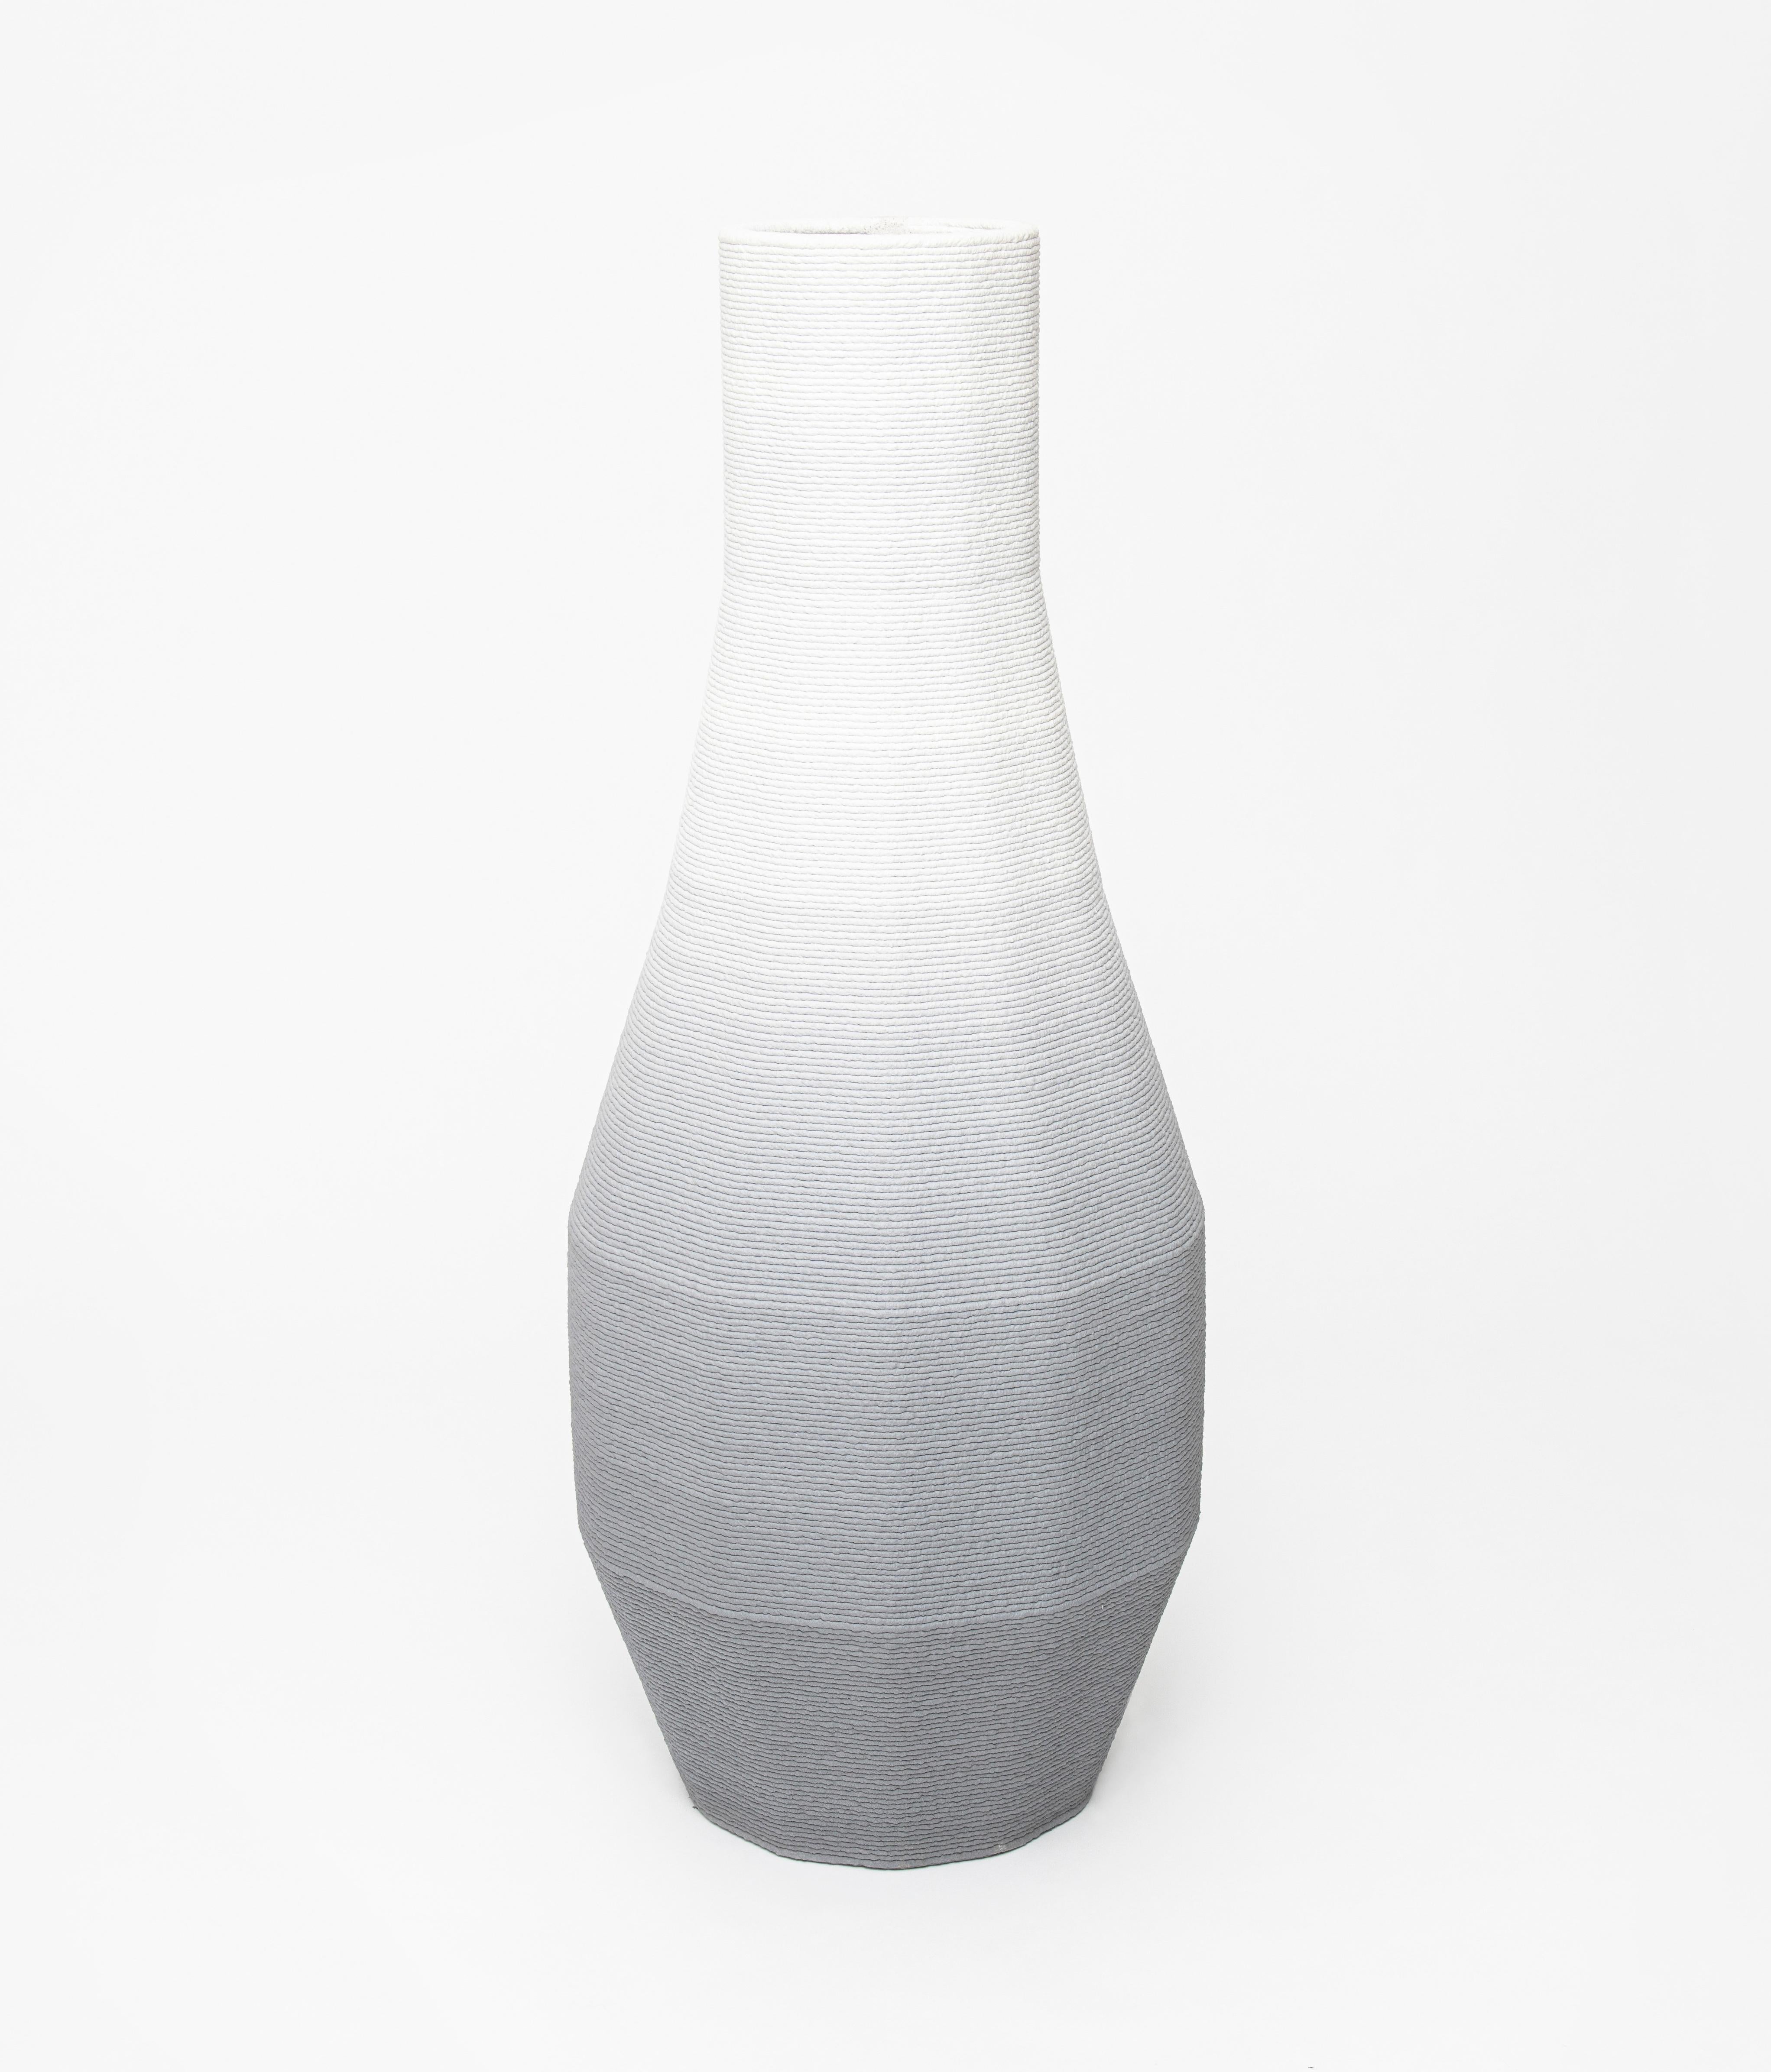 Large Concrete Gradient Vase by Philipp Aduatz In New Condition For Sale In Geneve, CH